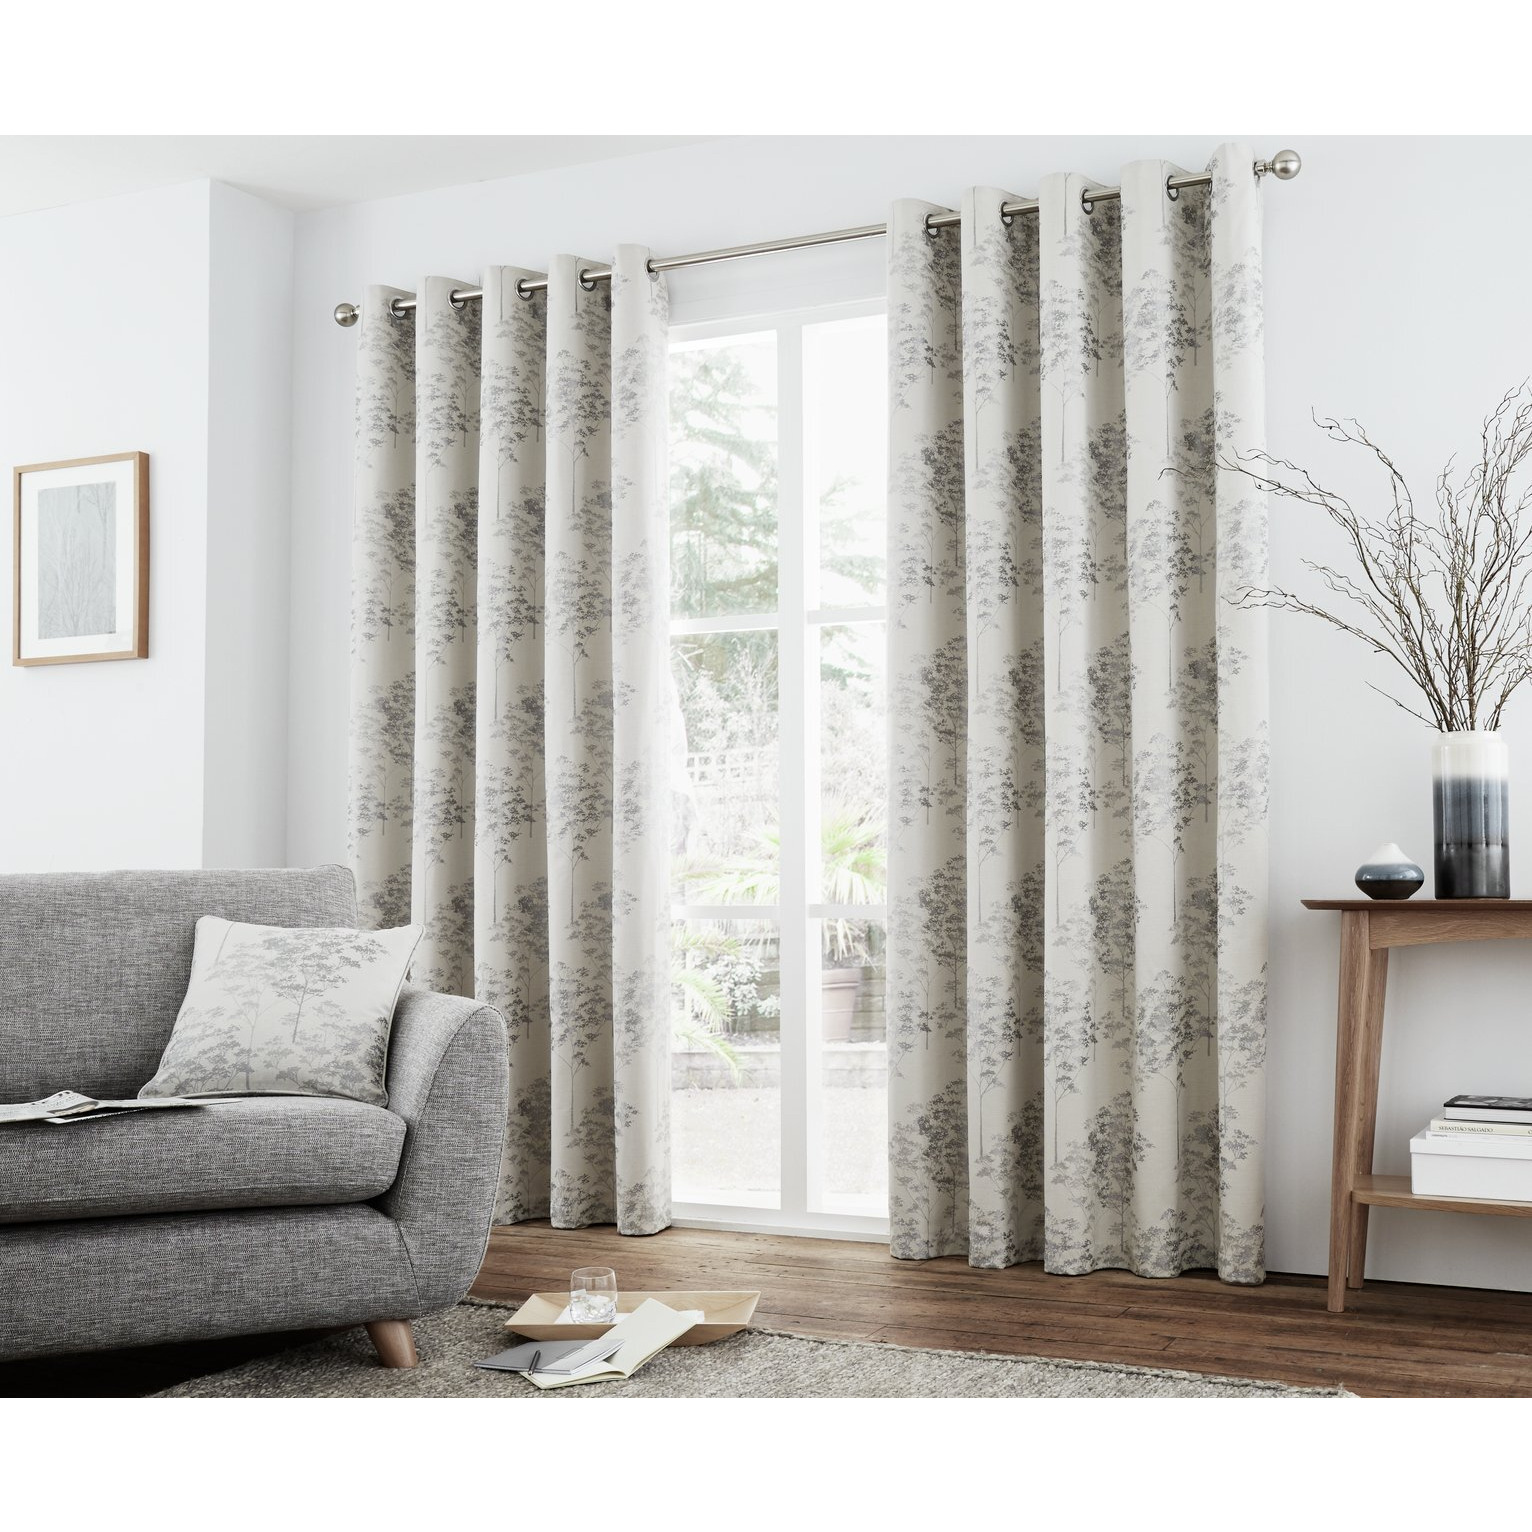 Curtina Elmwood Lined Curtains - 168x137cm - Silver - image 1